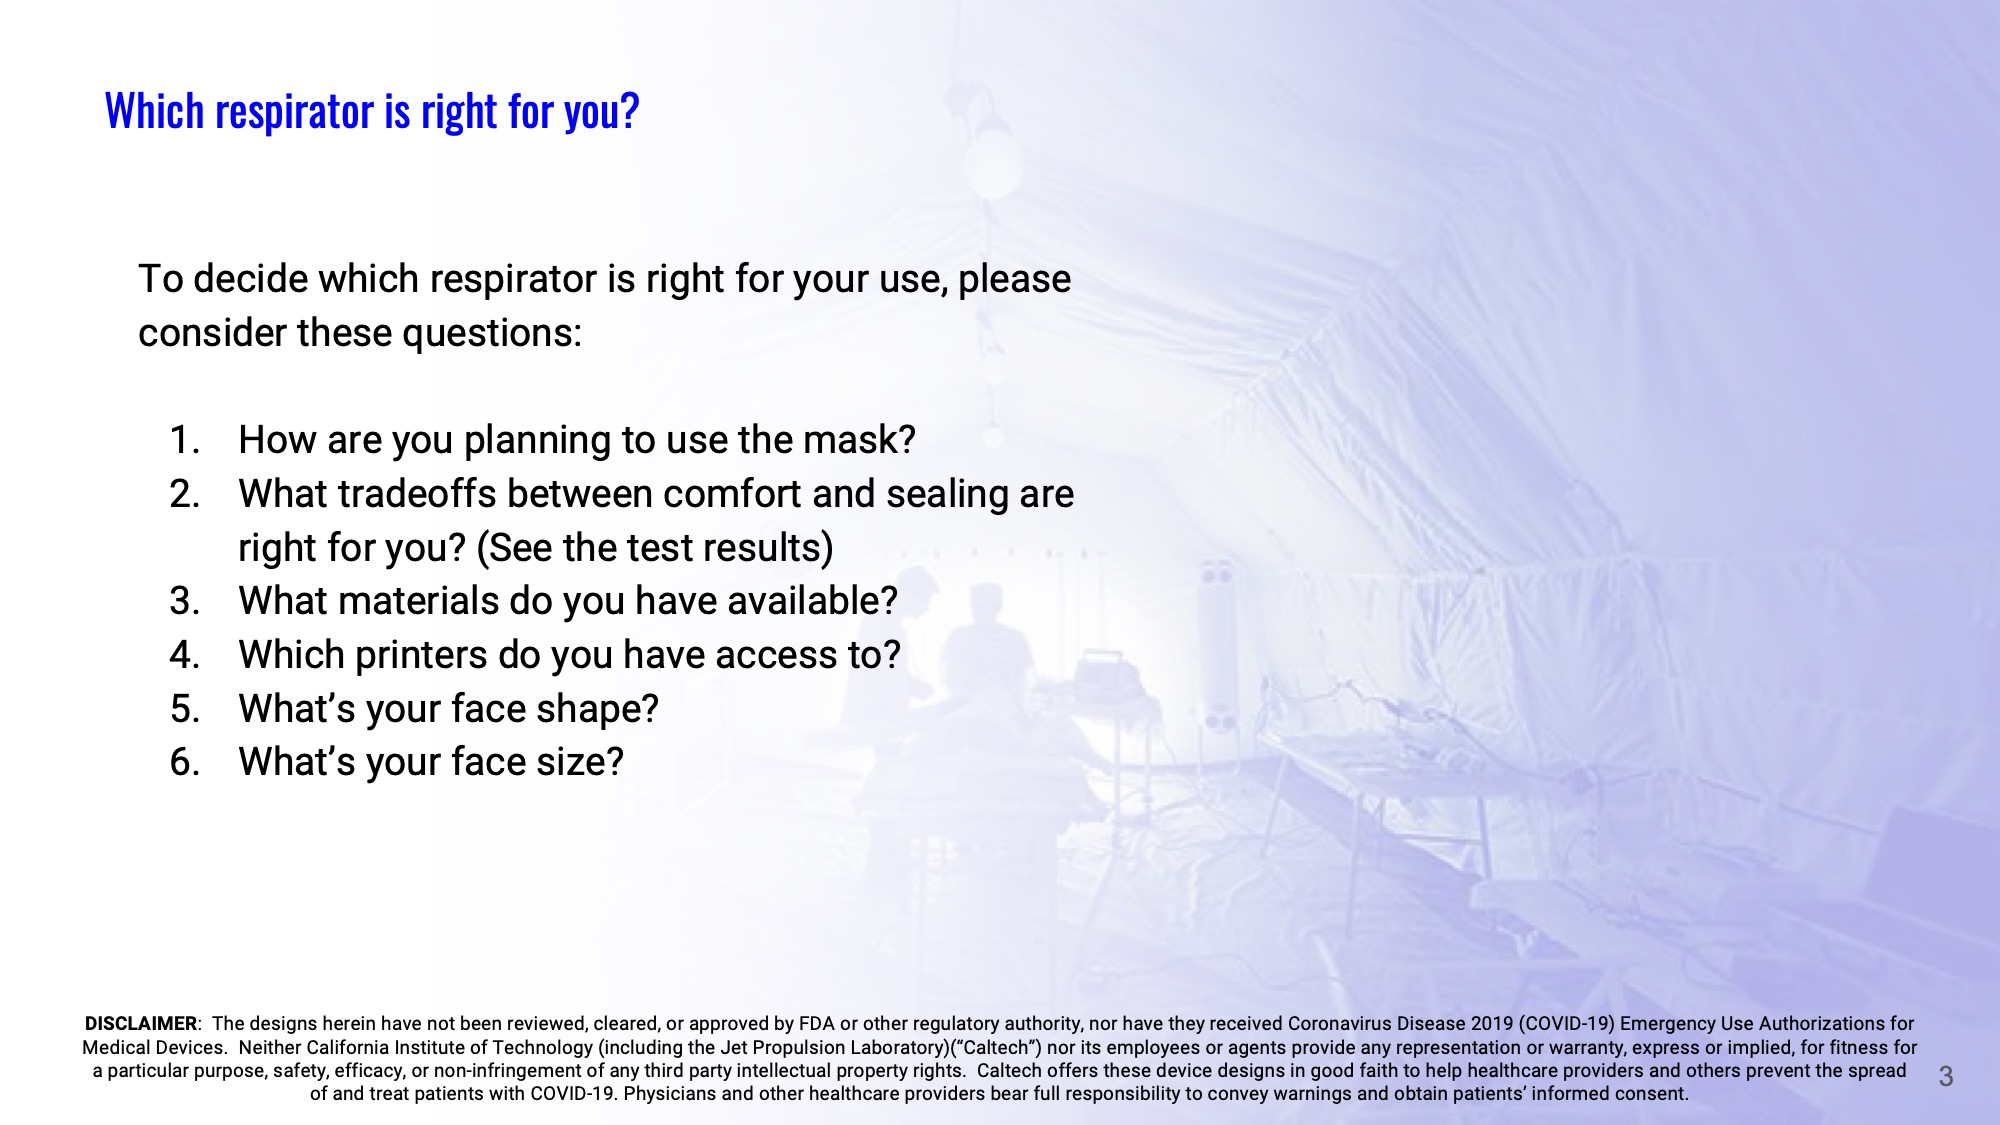 Slide 3: To decide which respirator is right for your use, please consider these questions: 1-How are you planning to use the mask? 2-What tradeoffs between comfort and sealing are right for you? (See the test results) 3-What materials do you have available? 4-Which printers do you have access to? 5-What’s your face shape? 6-What’s your face size?